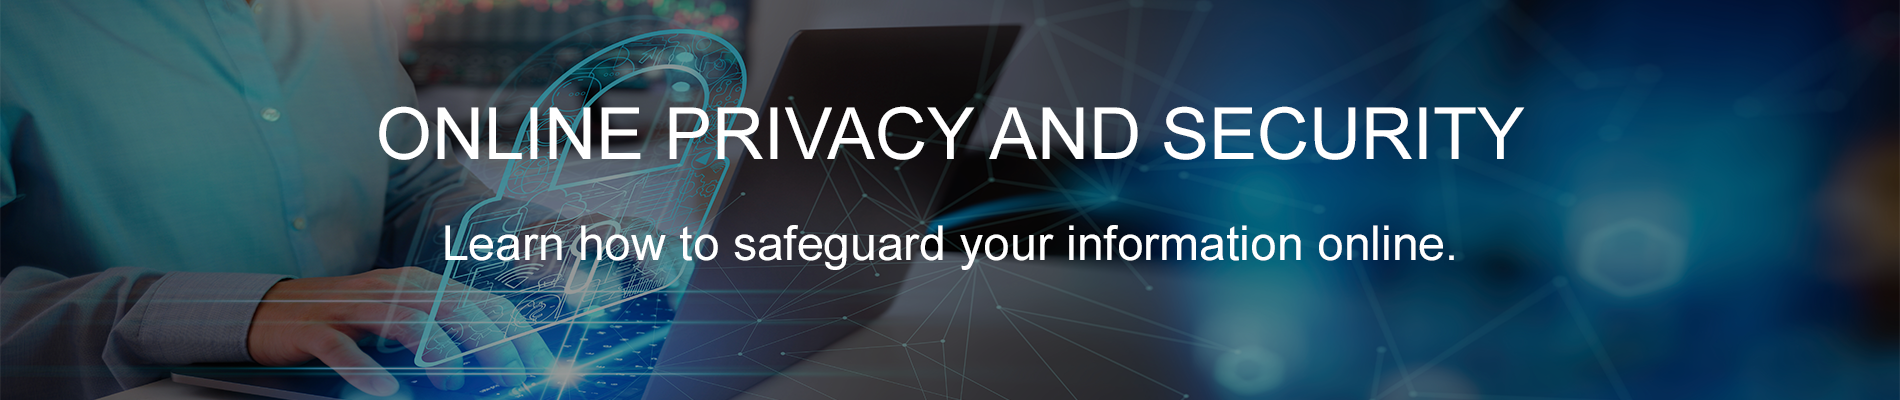 Pnline Privacy and Security